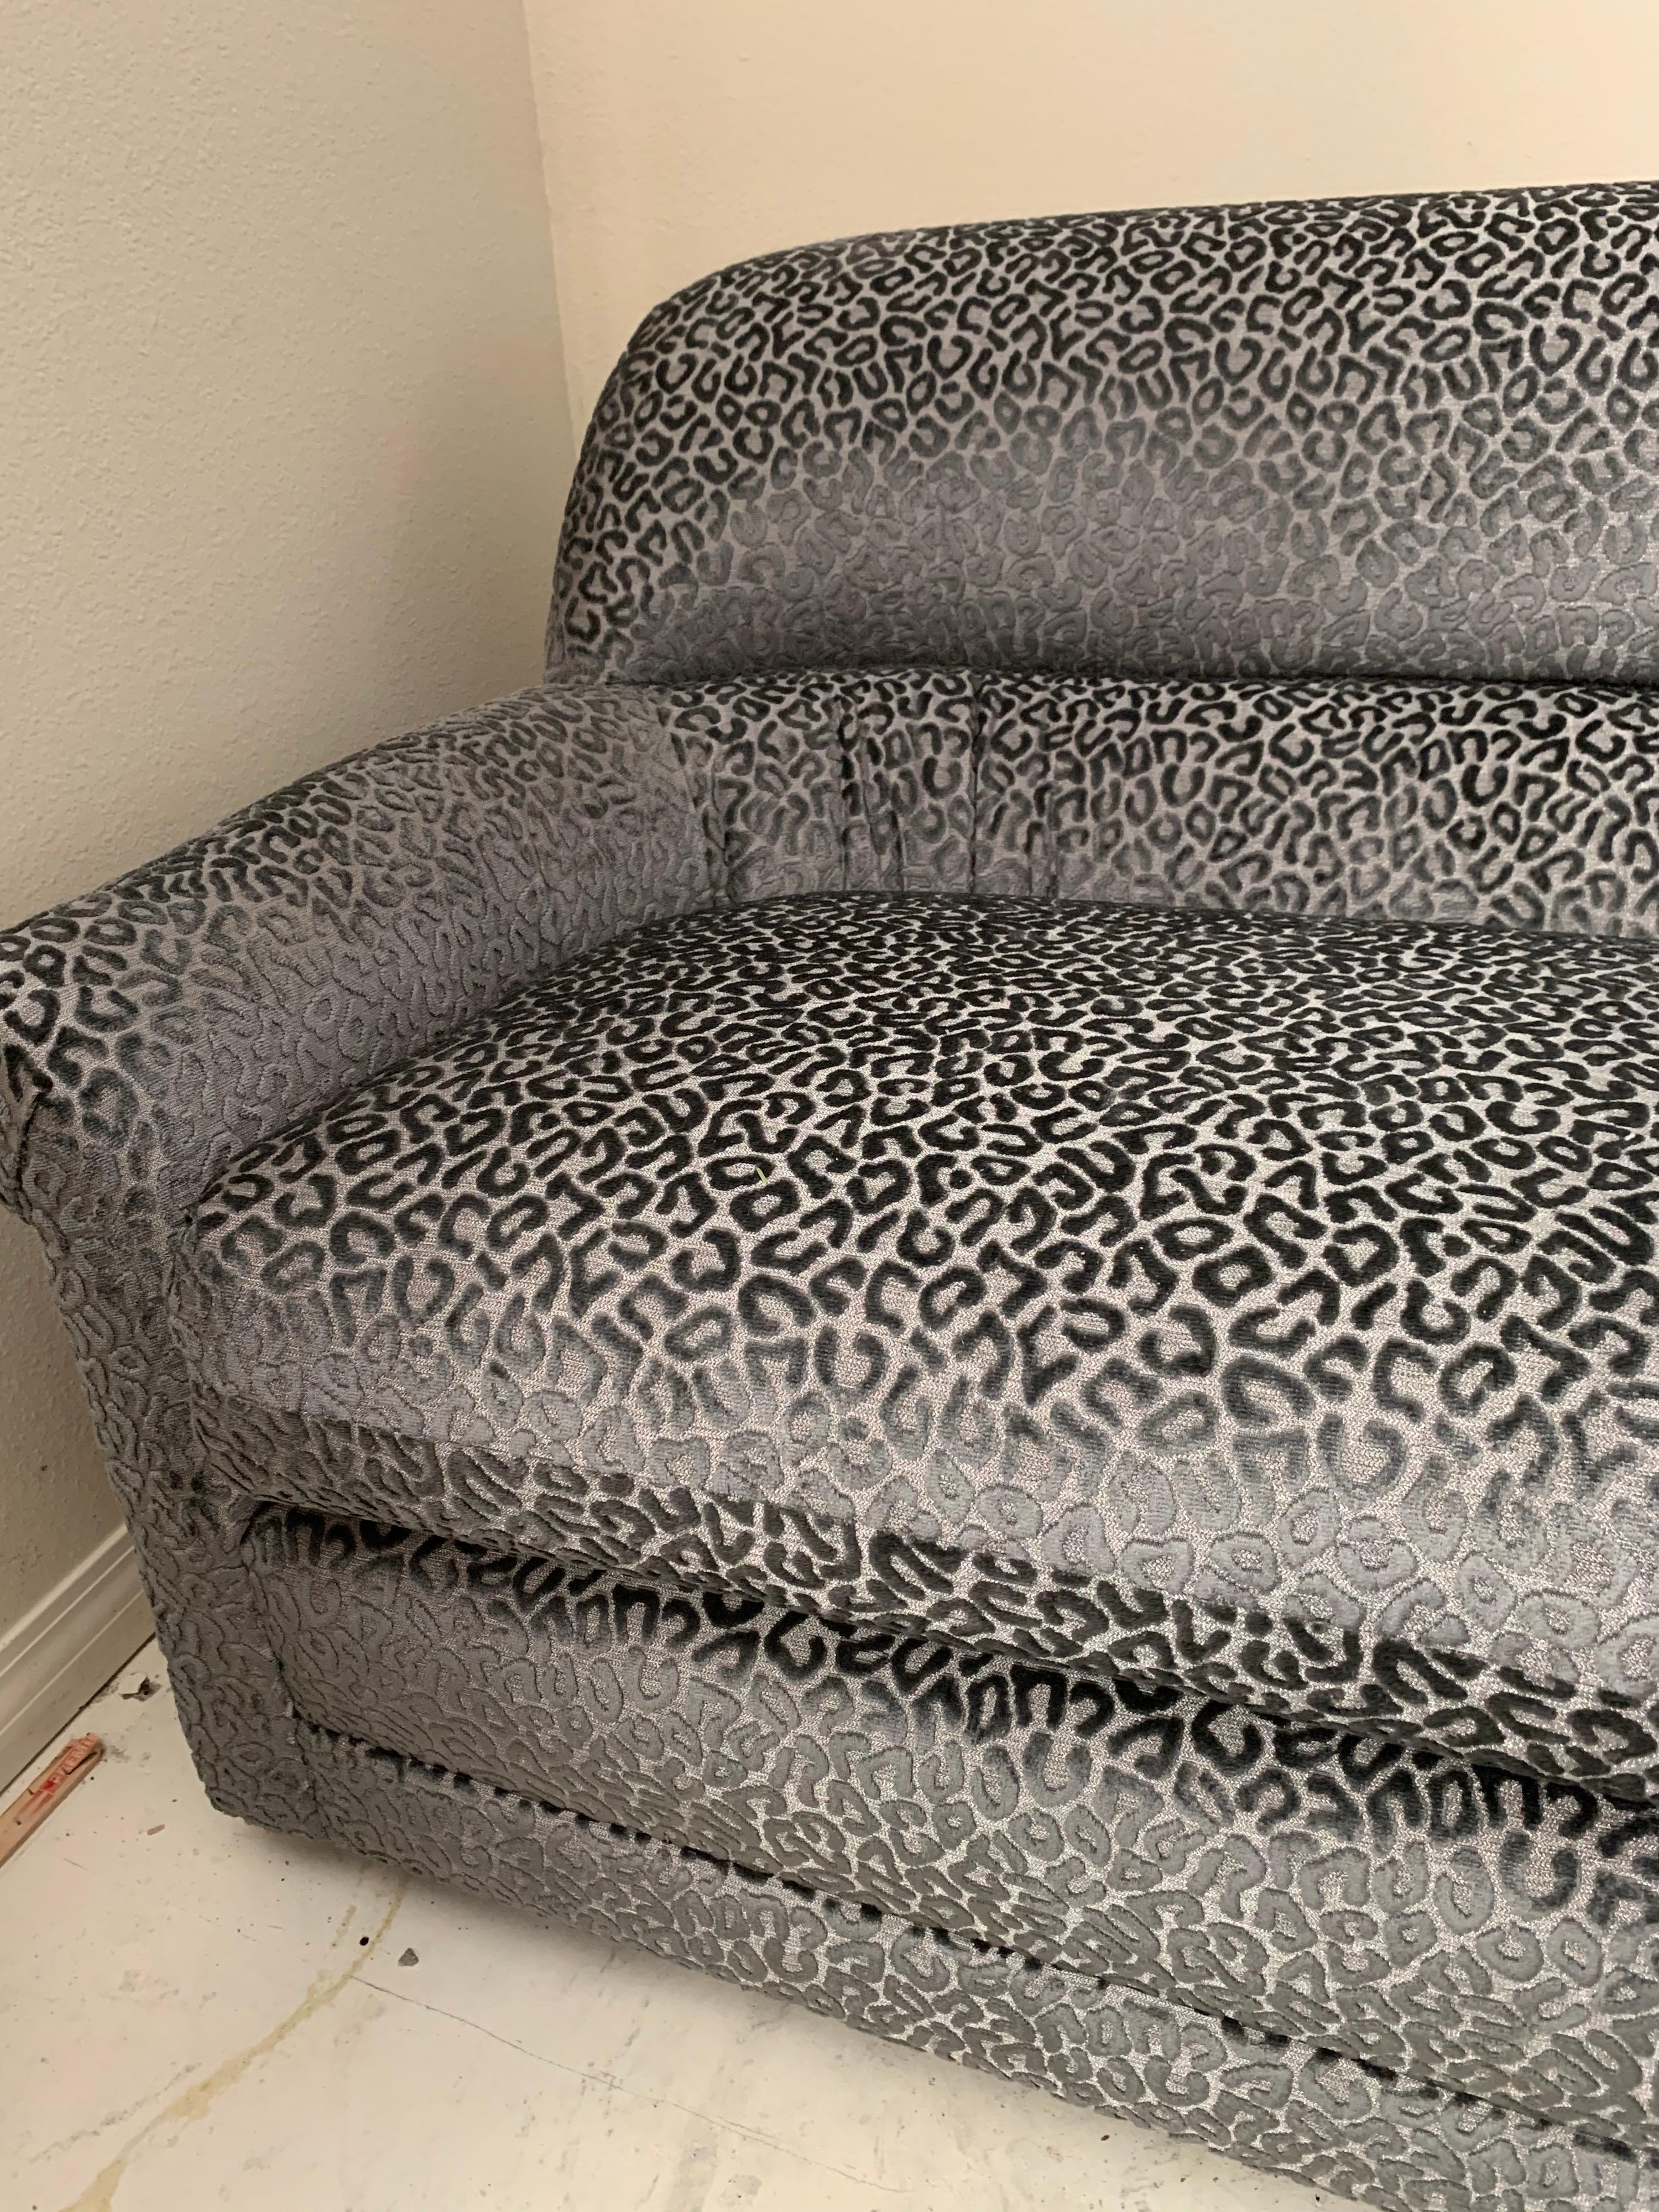 Modern 80s Sculptural Sofa in New Silver Grey Metallic Leopard Jacquard Fabric In Excellent Condition For Sale In Palm Springs, CA